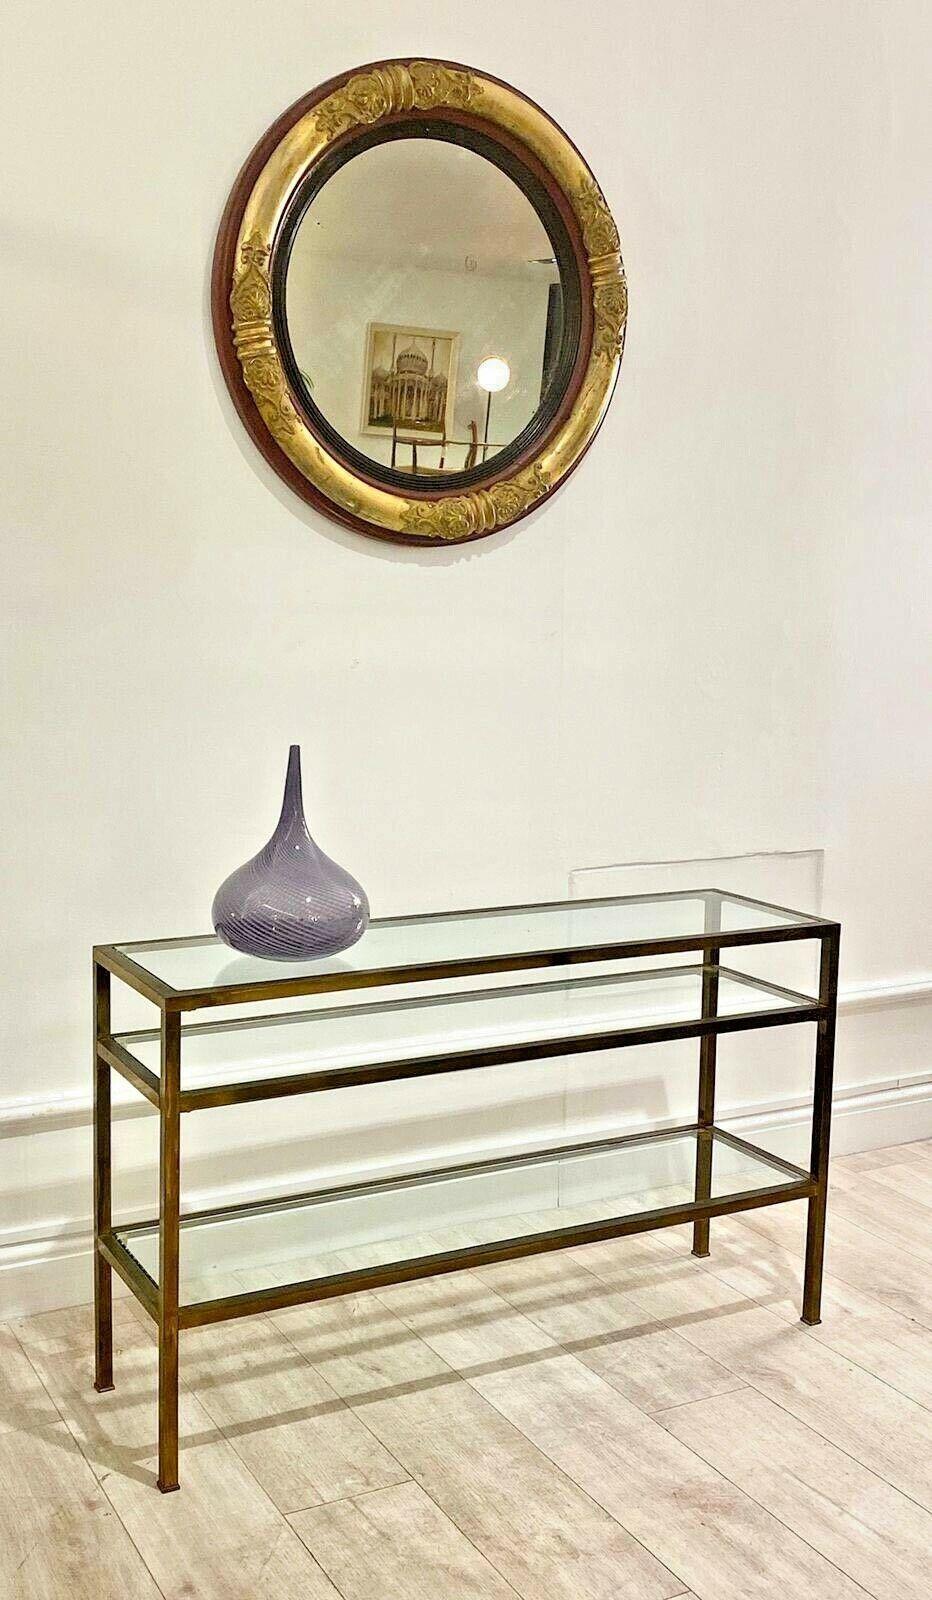 Beautiful and superb vintage brass and glass console table with a lovely bronzed patina. 

A good quality piece and timeless design with a glass top and glass shelf, very practical and stylish. 
Mid-Century Modern.